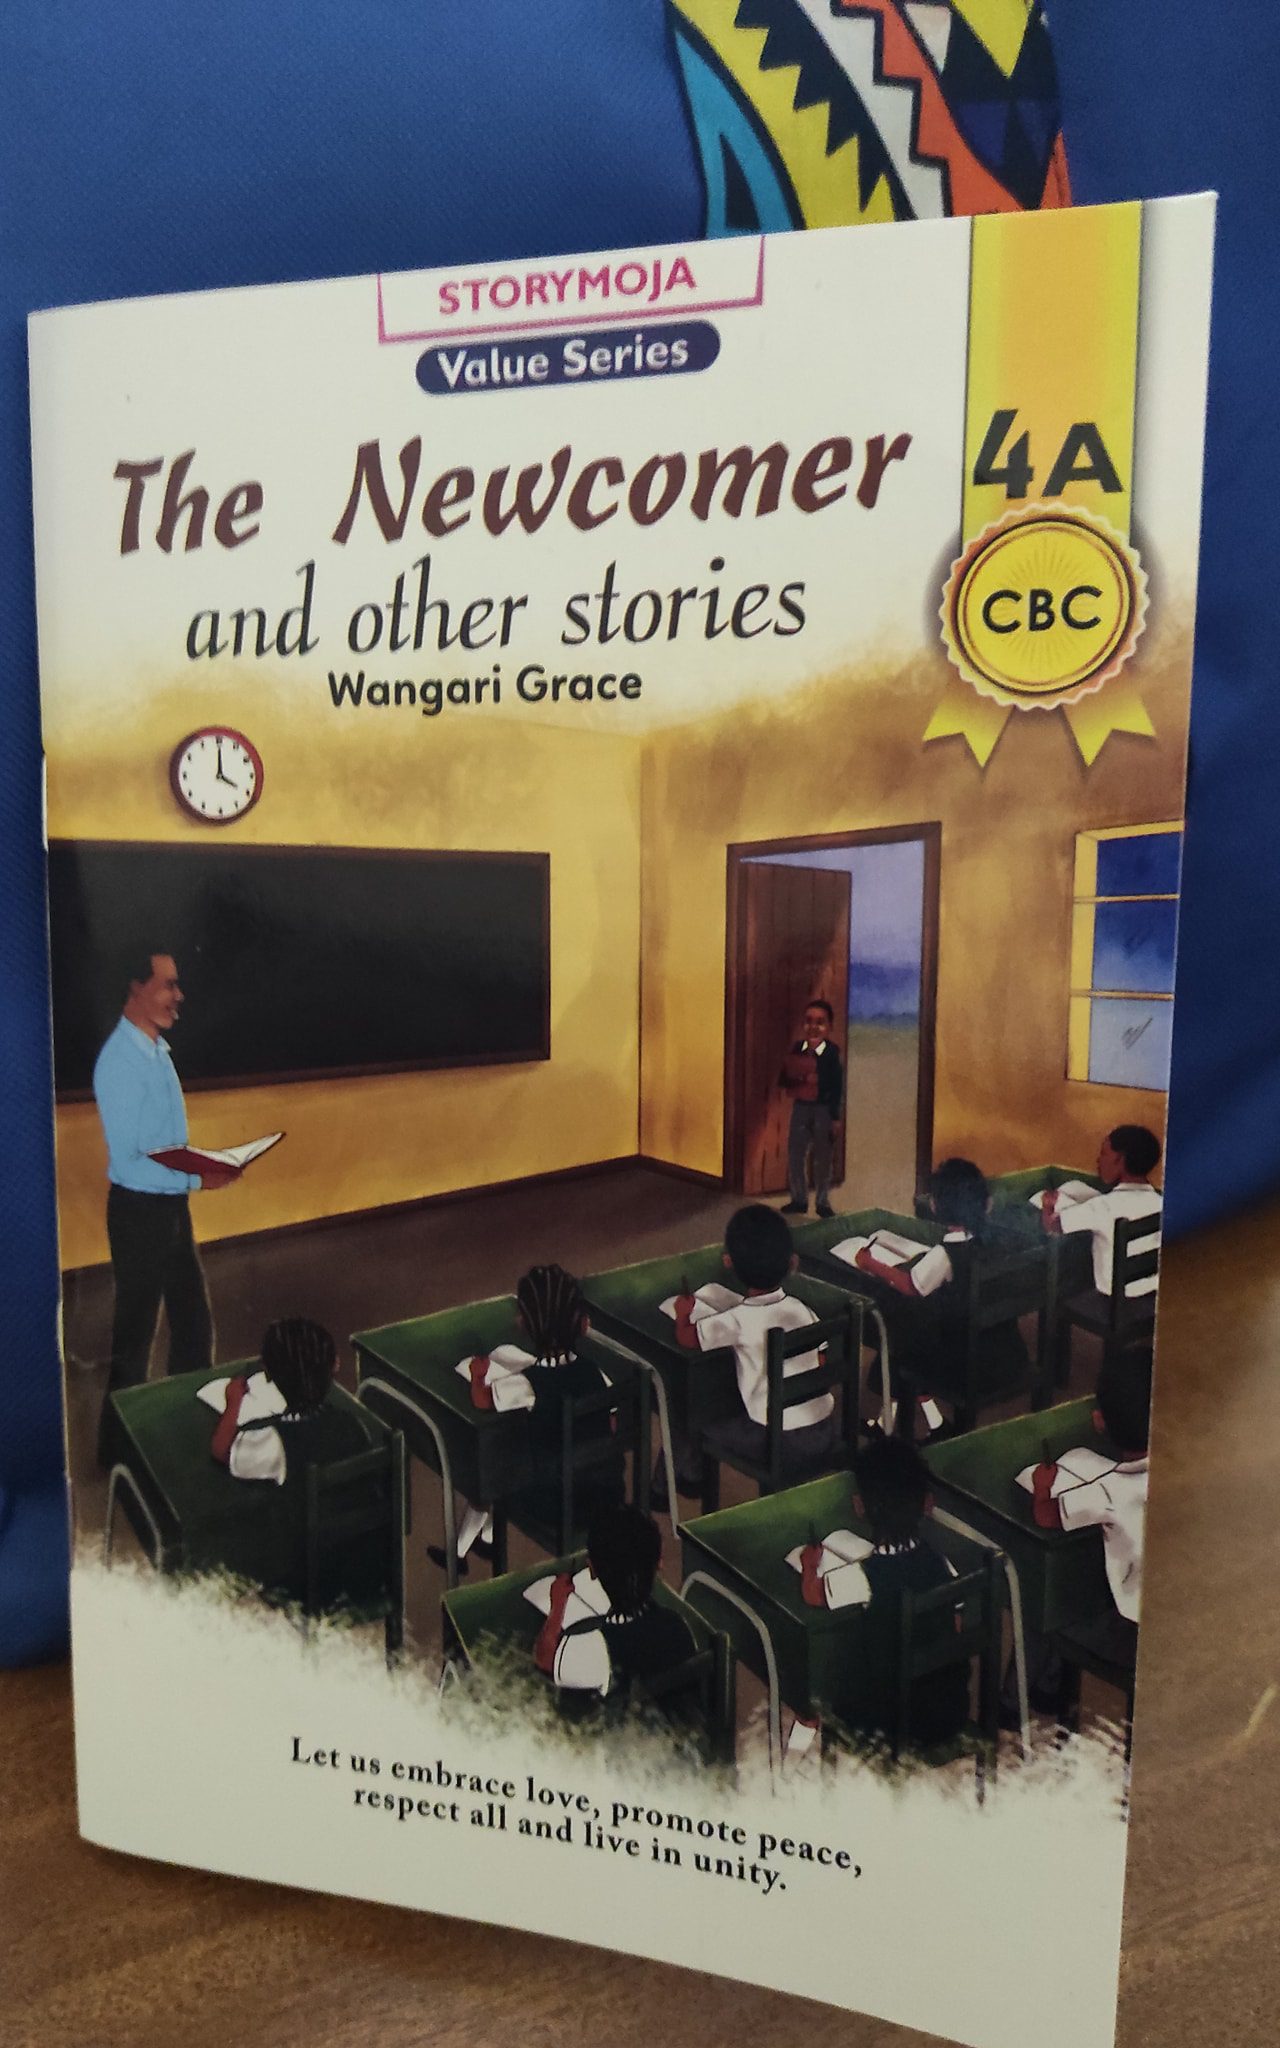 The Newcomer and Other Stories